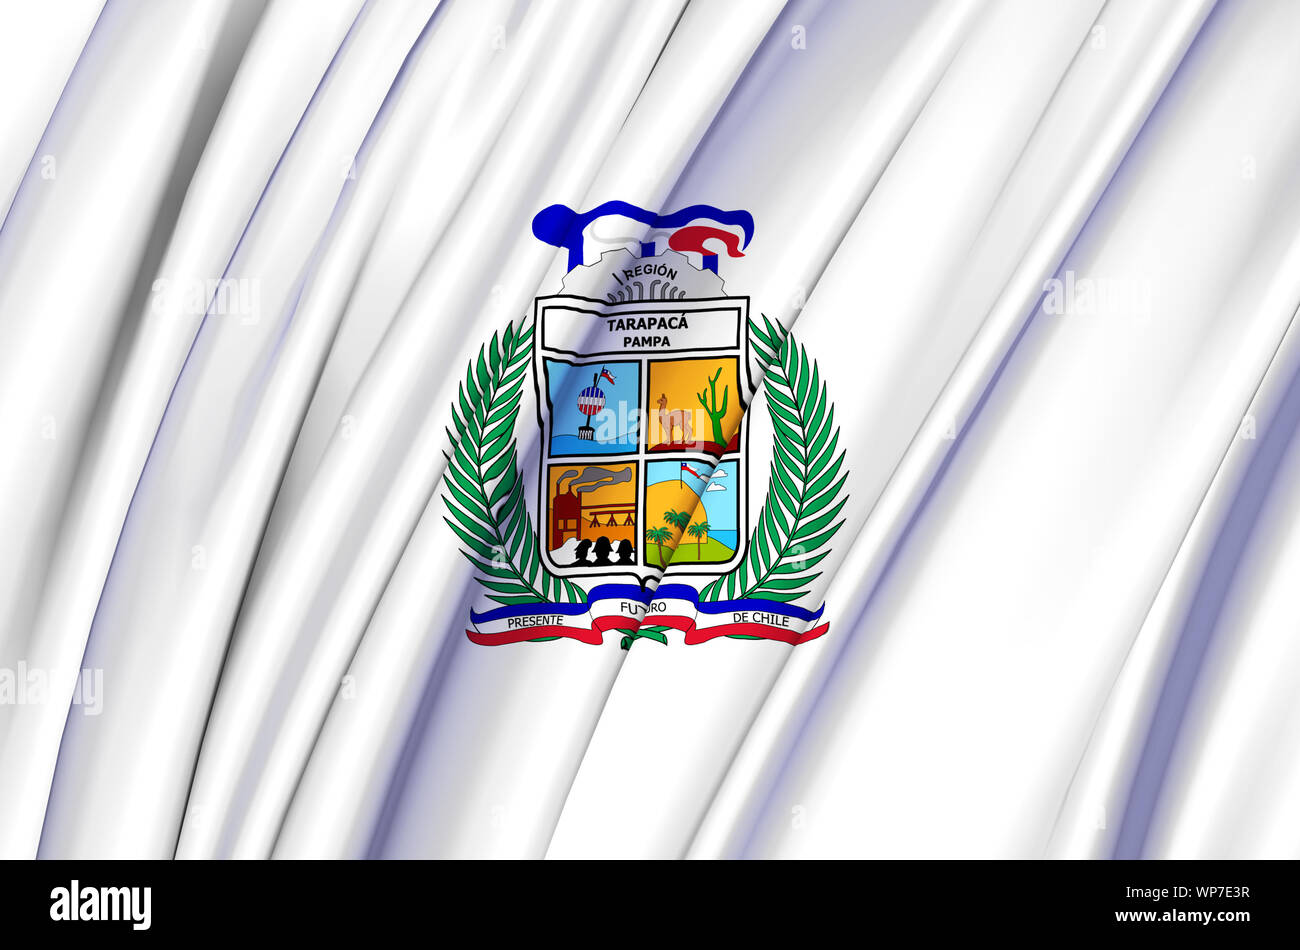 Tarapaca waving flag illustration. Regions of Chile. Perfect for background and texture usage. Stock Photo